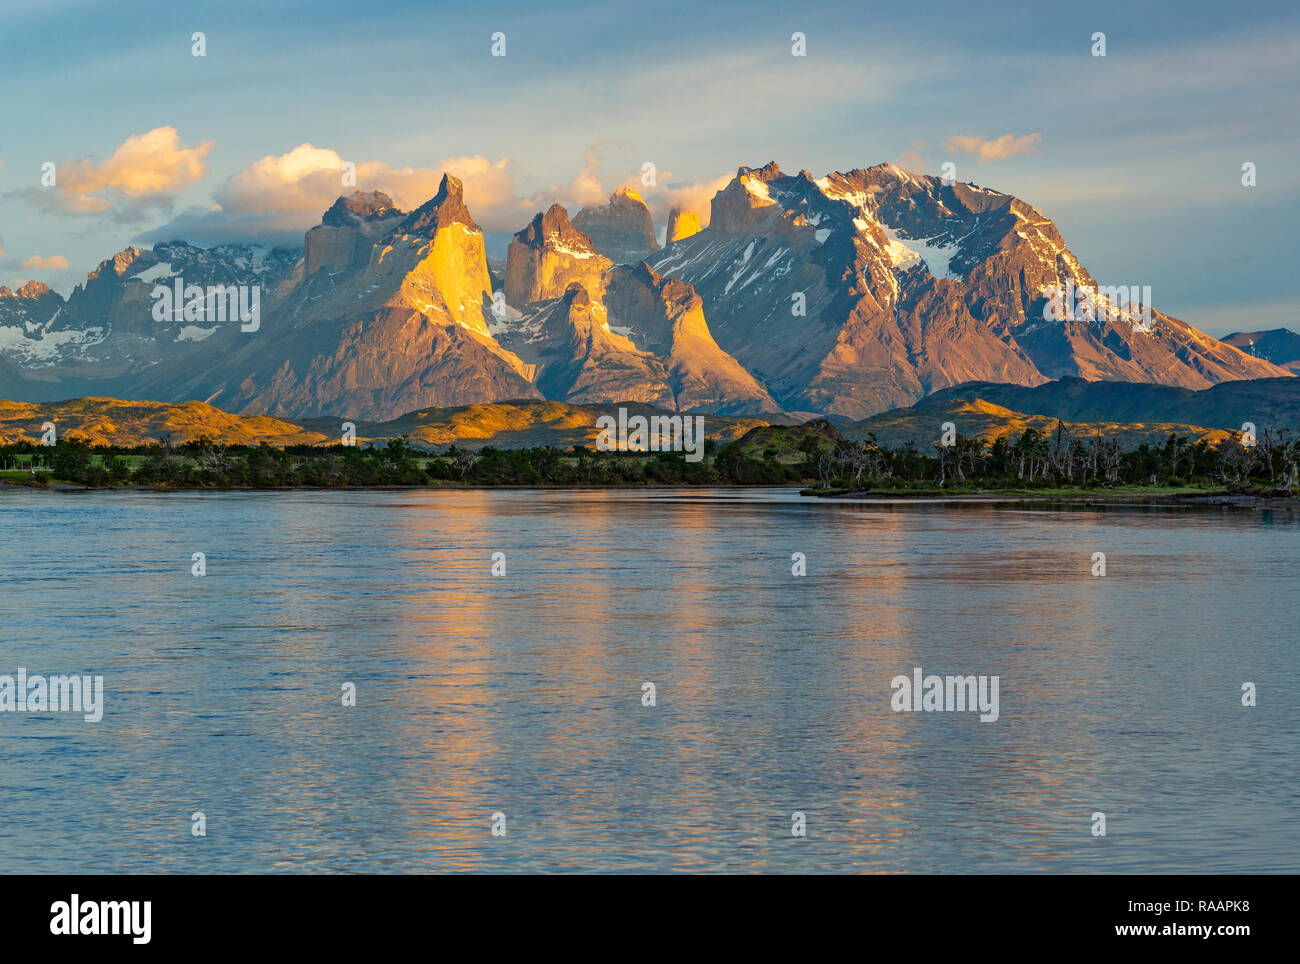 Landscape of the Cuernos and Torres del Paine at sunset by the Serrano River inside Torres del Paine national park, Patagonia, Chile. Stock Photo